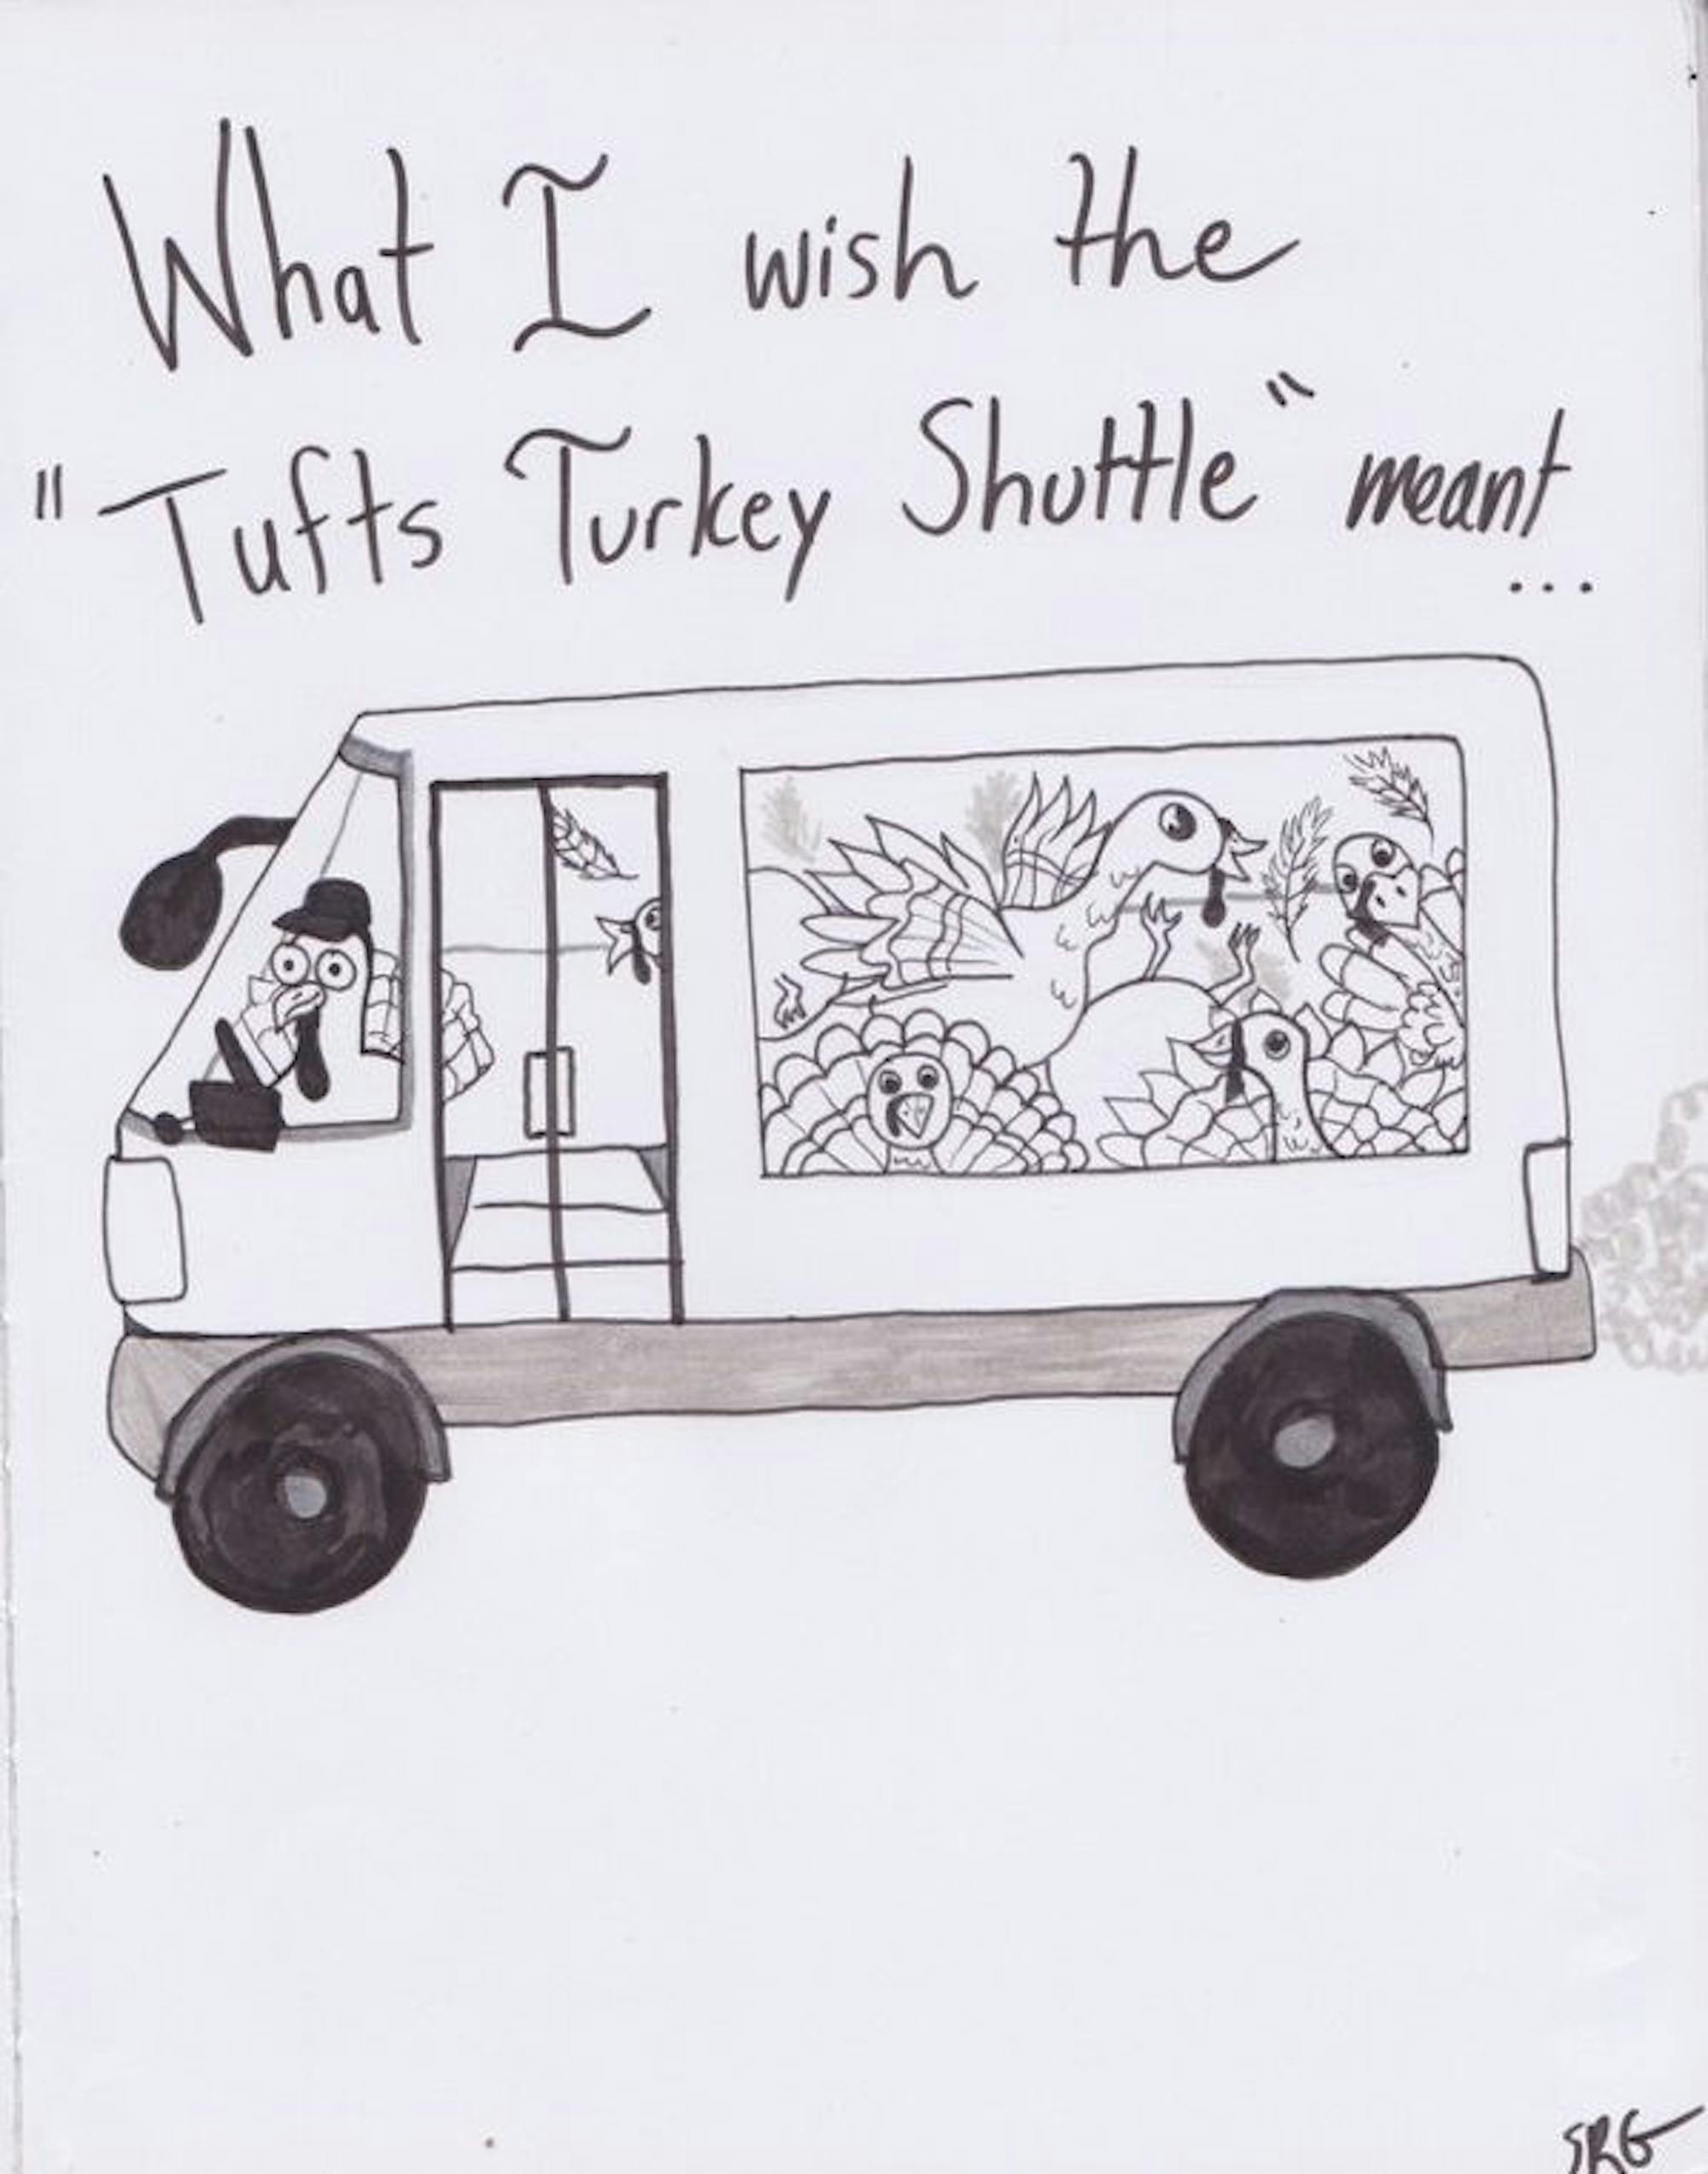 Shannon-What-I-Wish-the-Turkey-Shuttle-Meant-e1541628633178